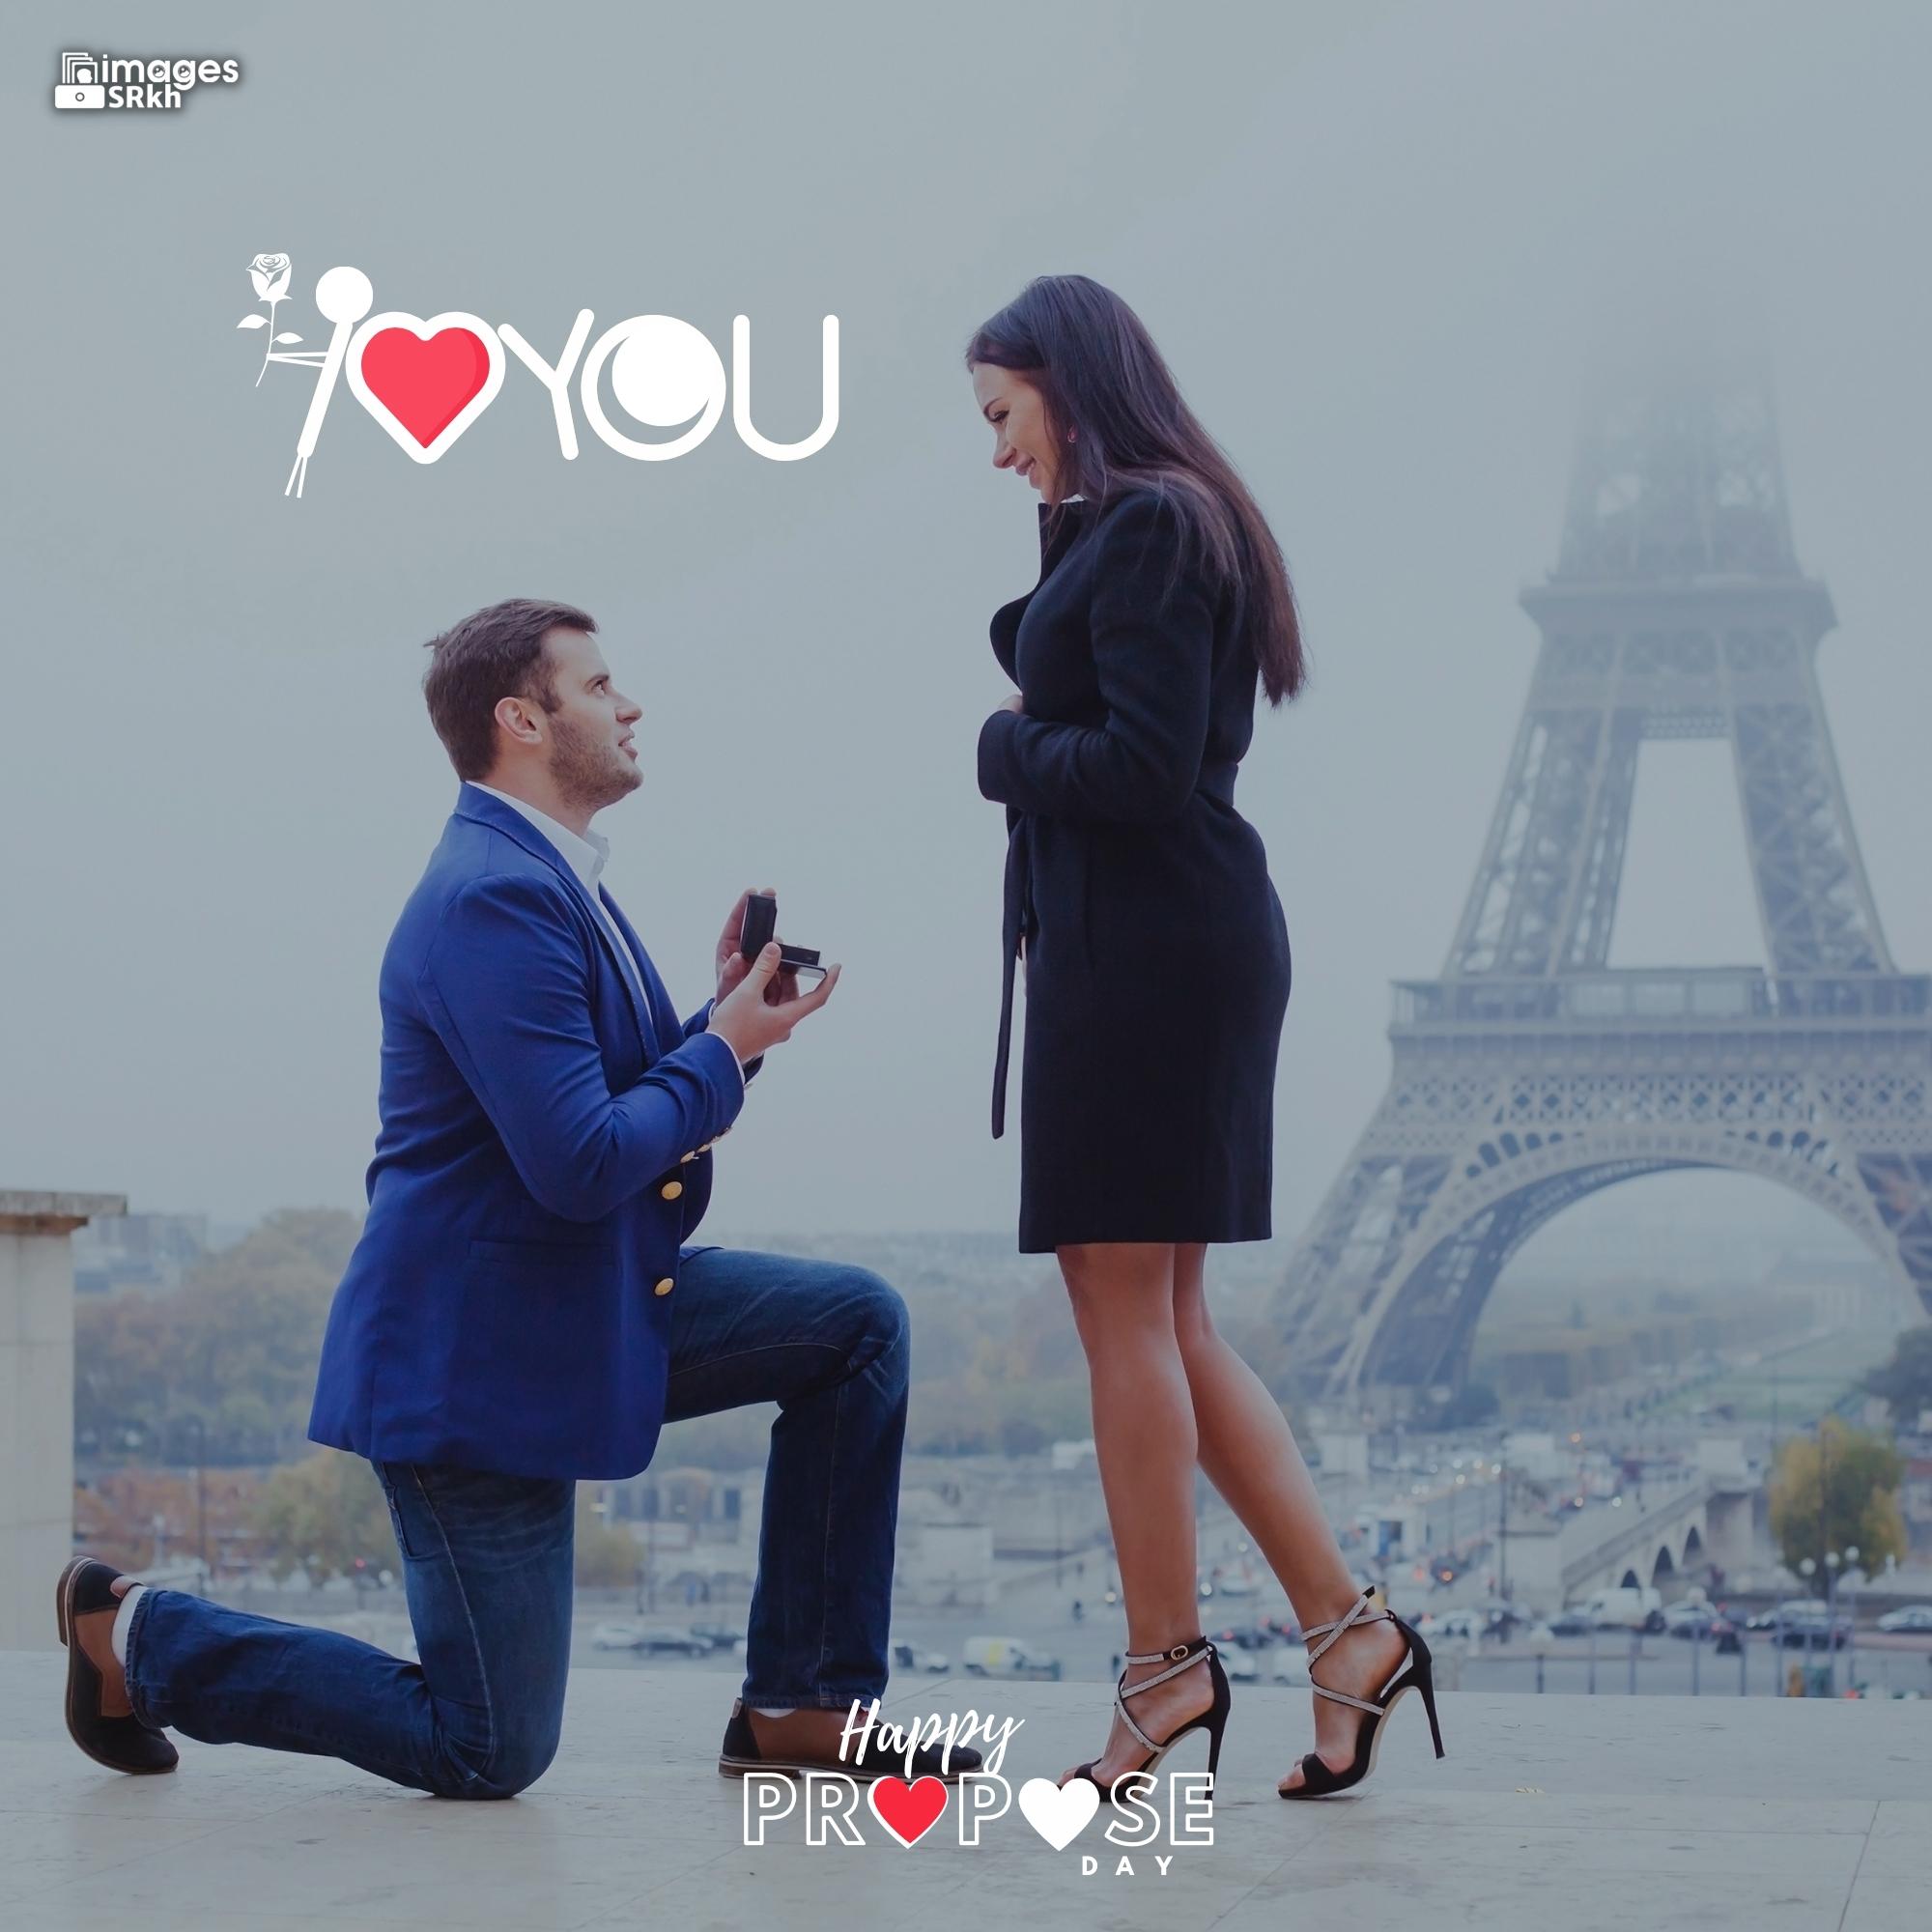 Happy Propose Day Images | 328 | I LOVE YOU